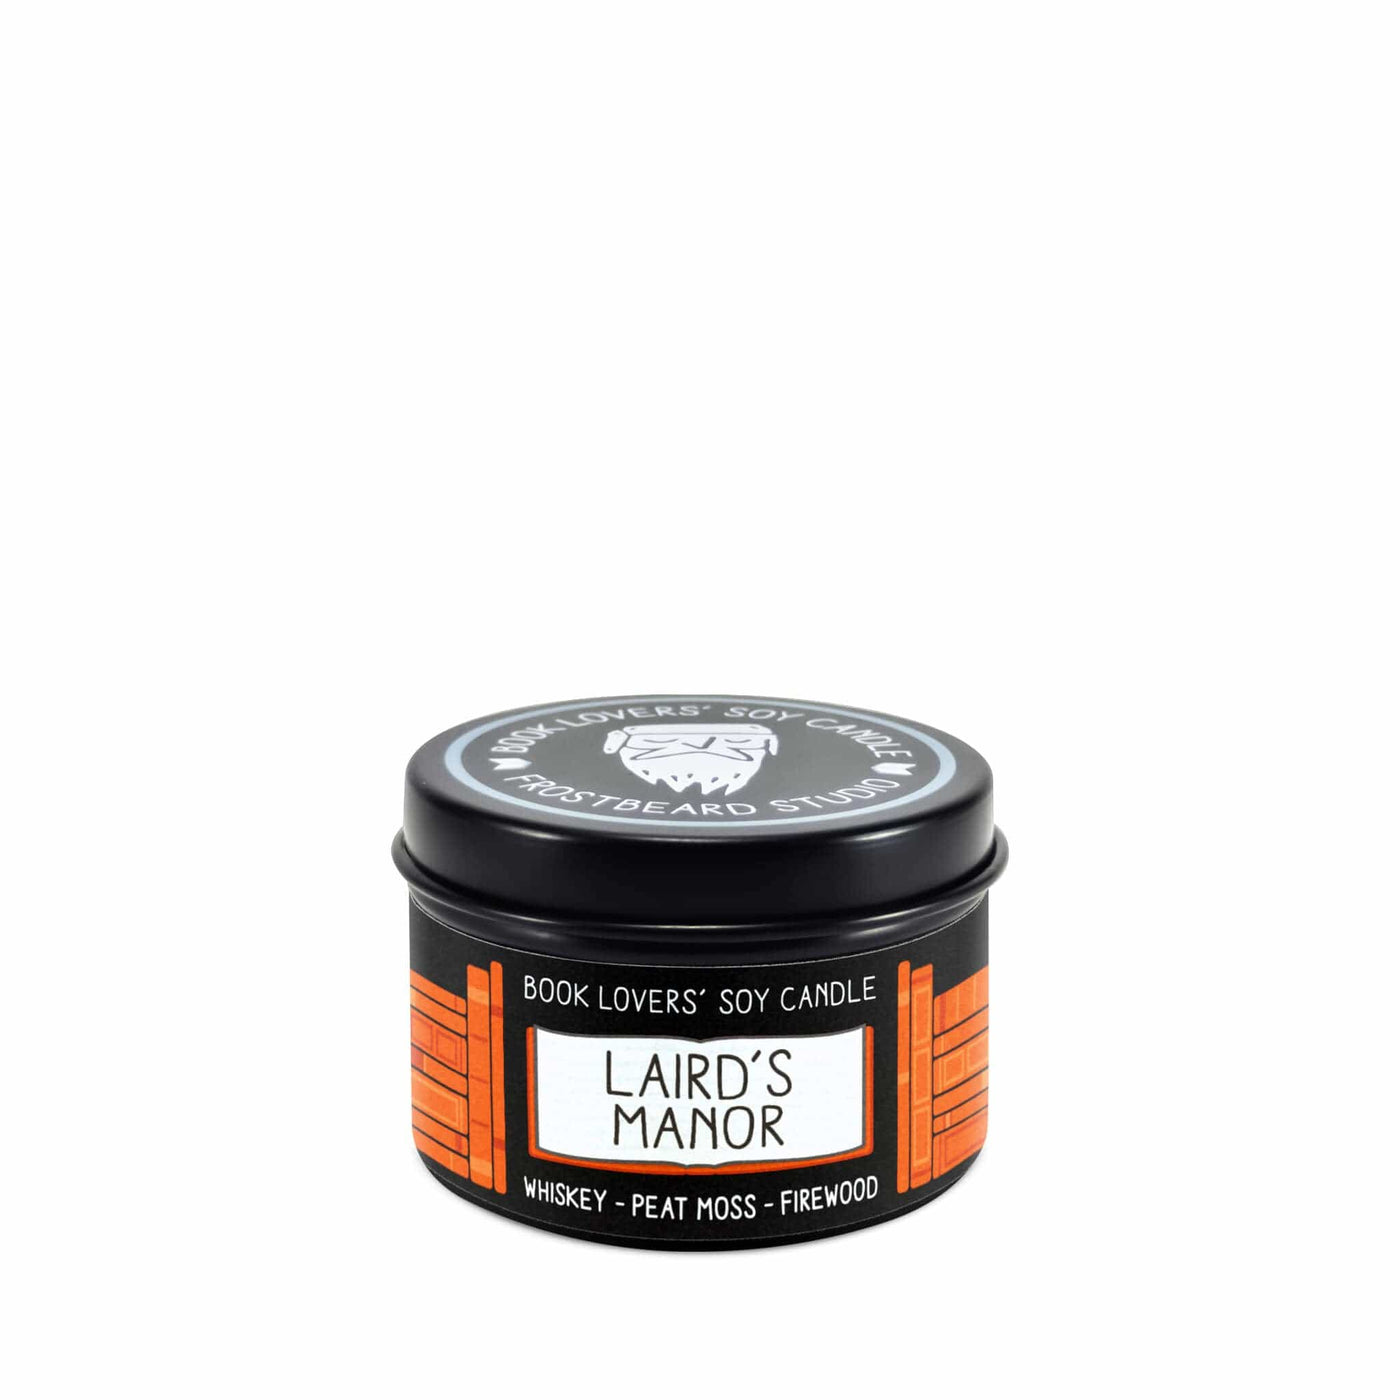 Laird's Manor - 2 oz Tin - Book Lovers' Soy Candle - Frostbeard Studio